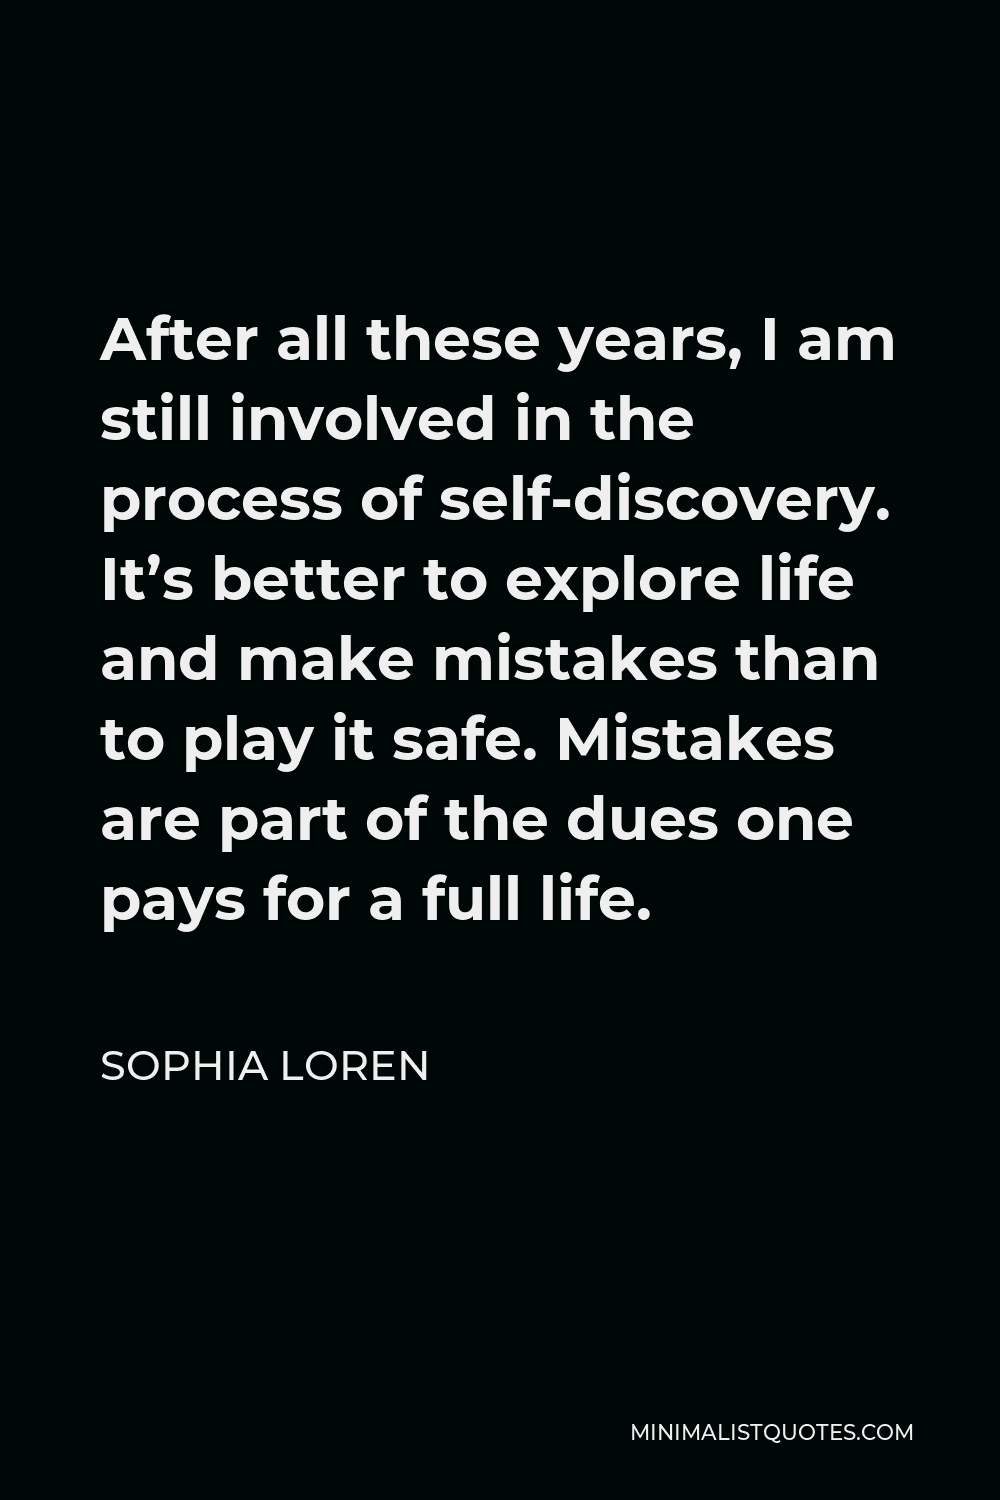 Sophia Loren Quote - After all these years, I am still involved in the process of self-discovery. It’s better to explore life and make mistakes than to play it safe. Mistakes are part of the dues one pays for a full life.